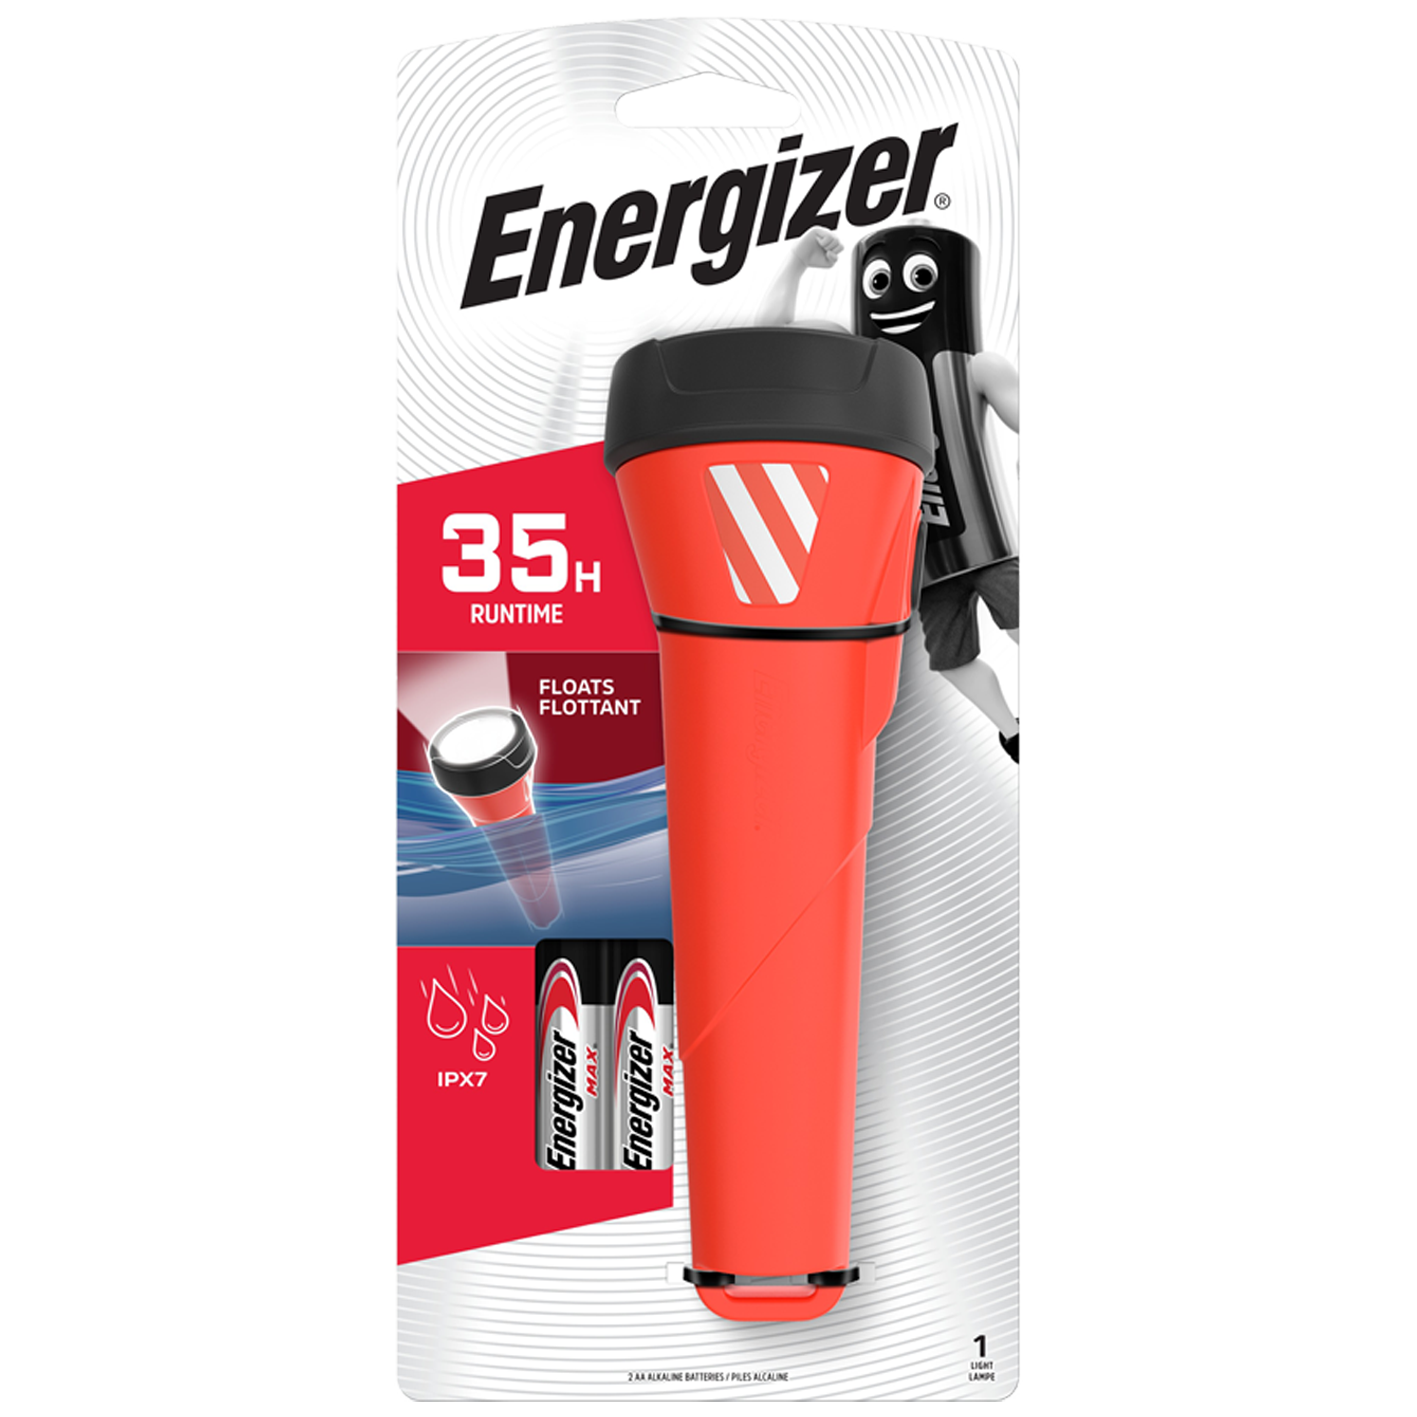 Energizer Waterproof 55 Lumen LED Torch With 2 x AA Batteries